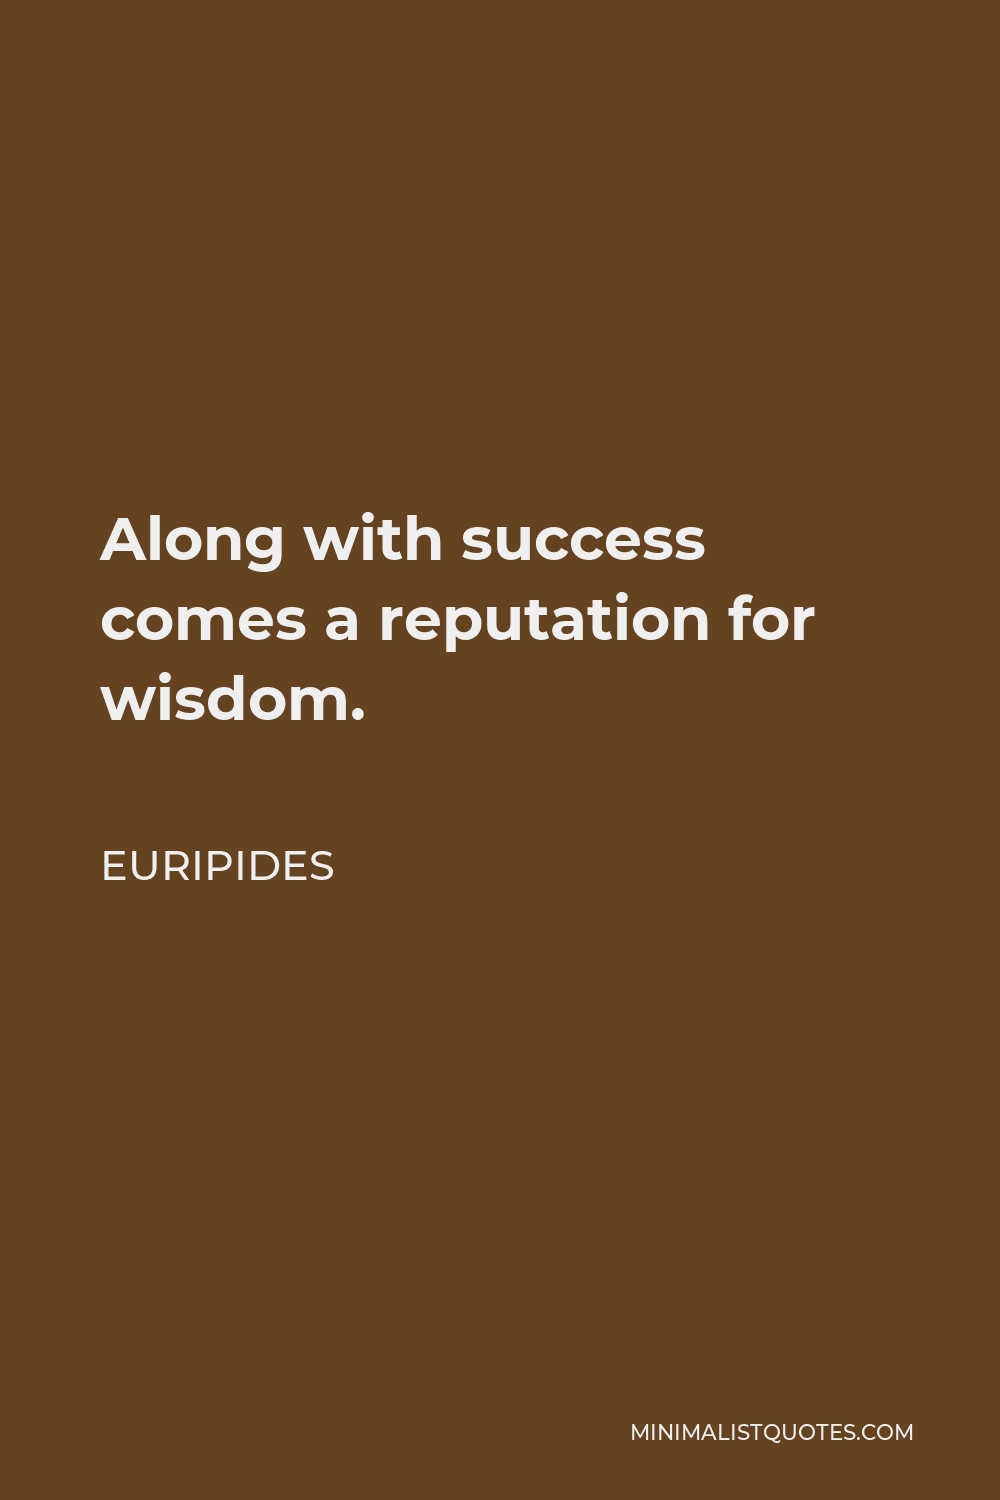 Euripides Quote - Along with success comes a reputation for wisdom.